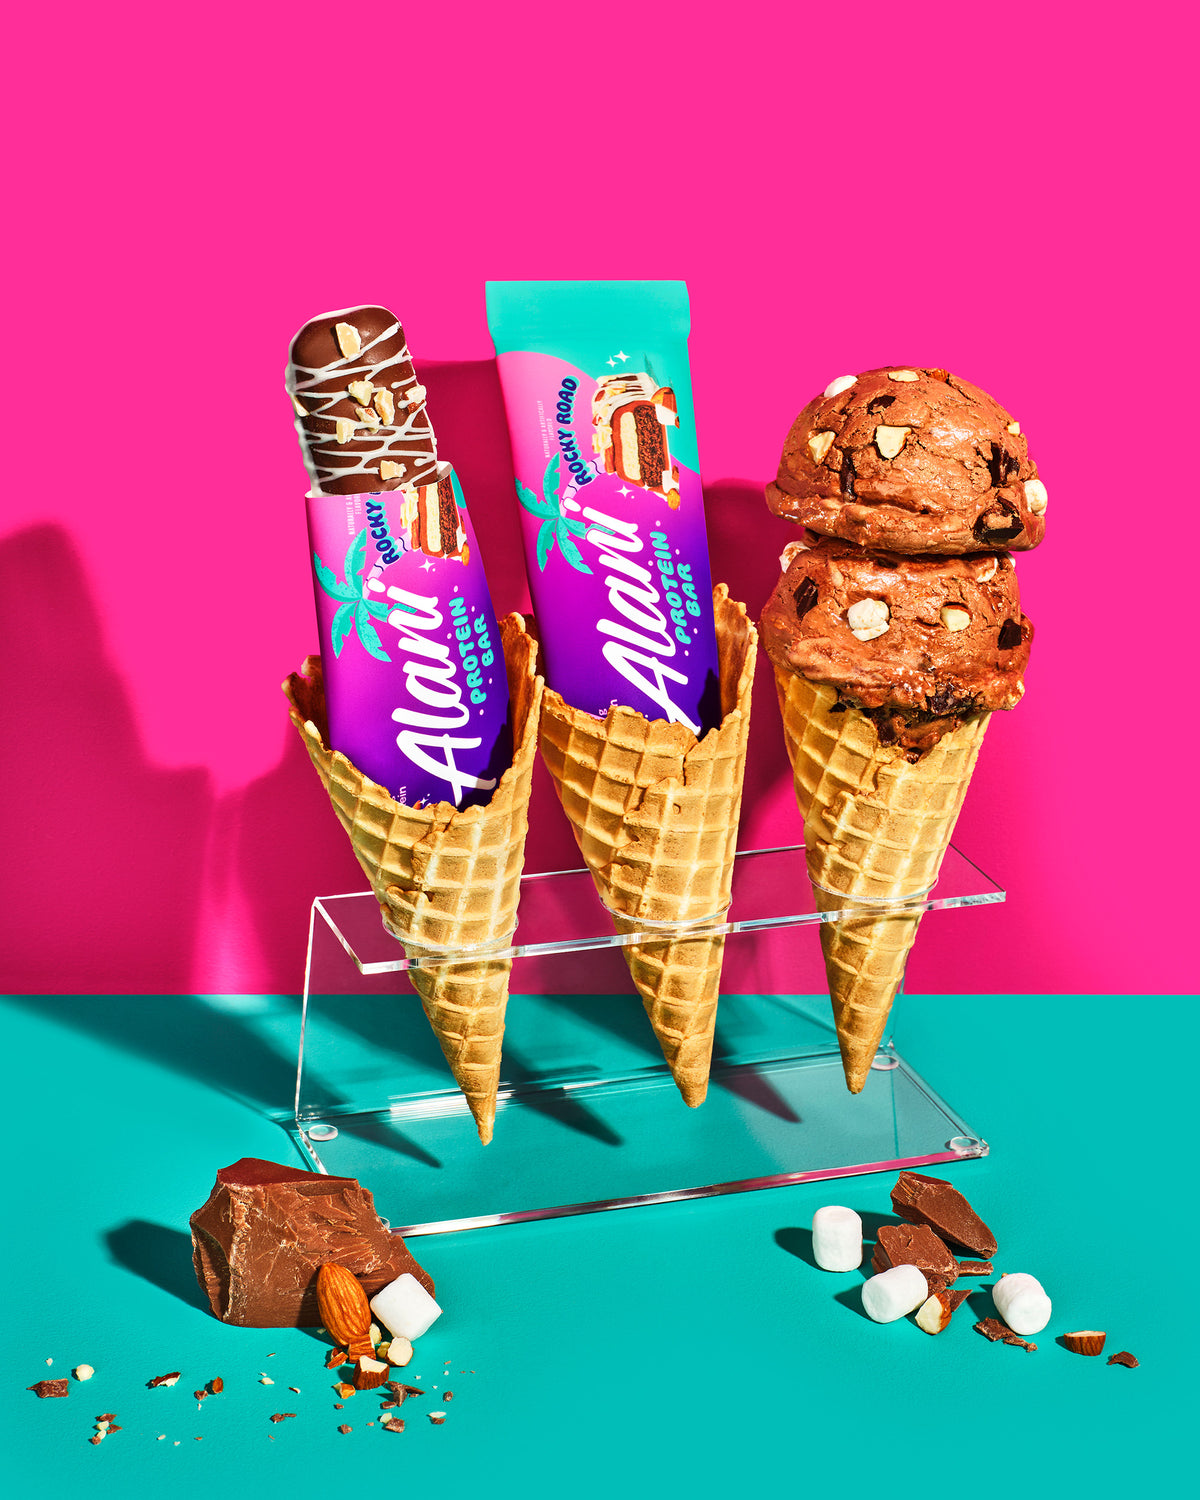 Two Protein Bars in Rocky Road flavor perched next to ice cream cones.